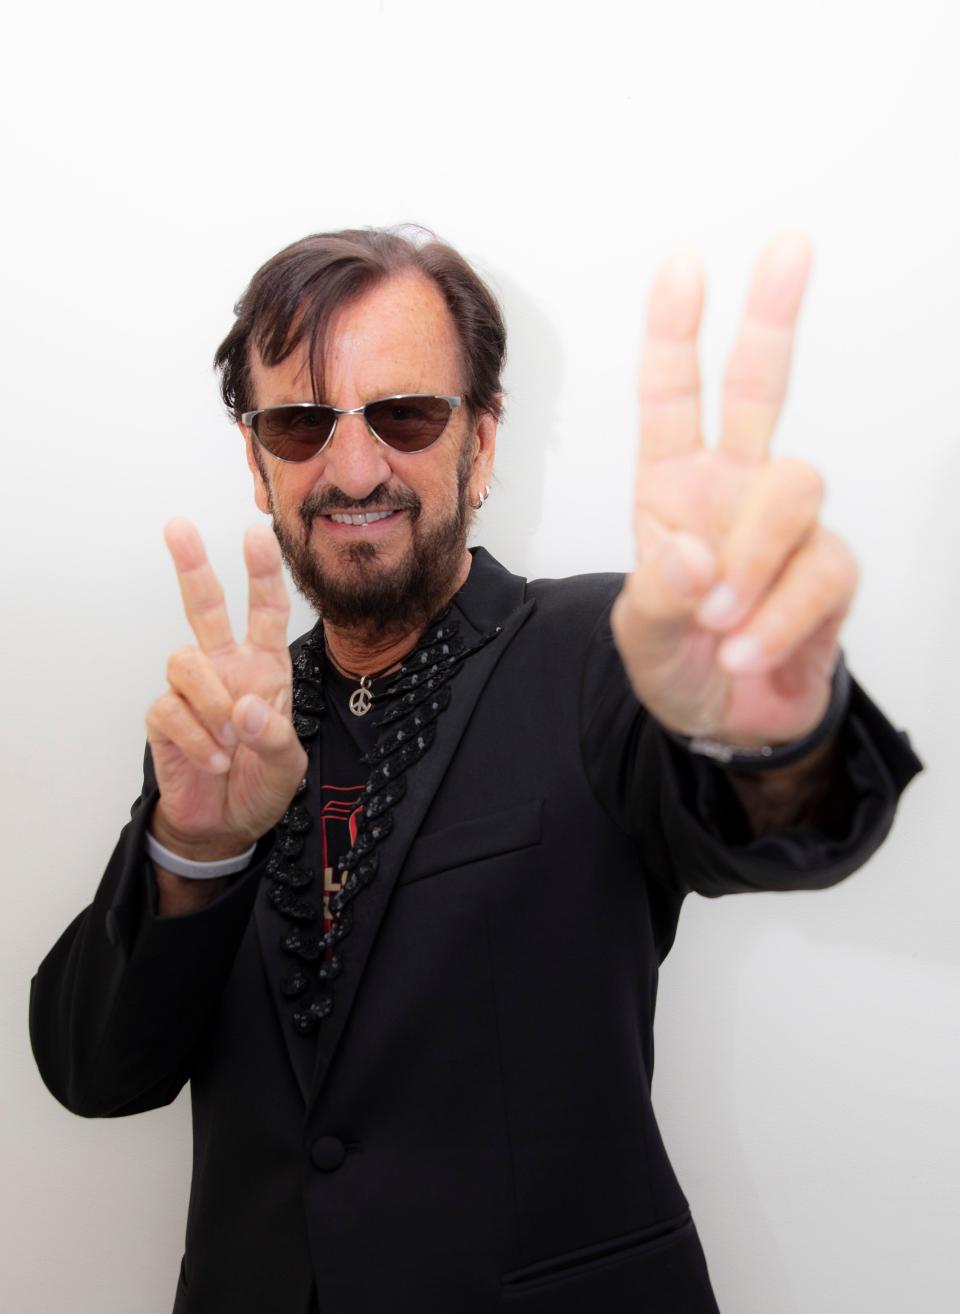 Ringo Starr turns 84 in July, but The Beatles drummer is still actively touring and recording.